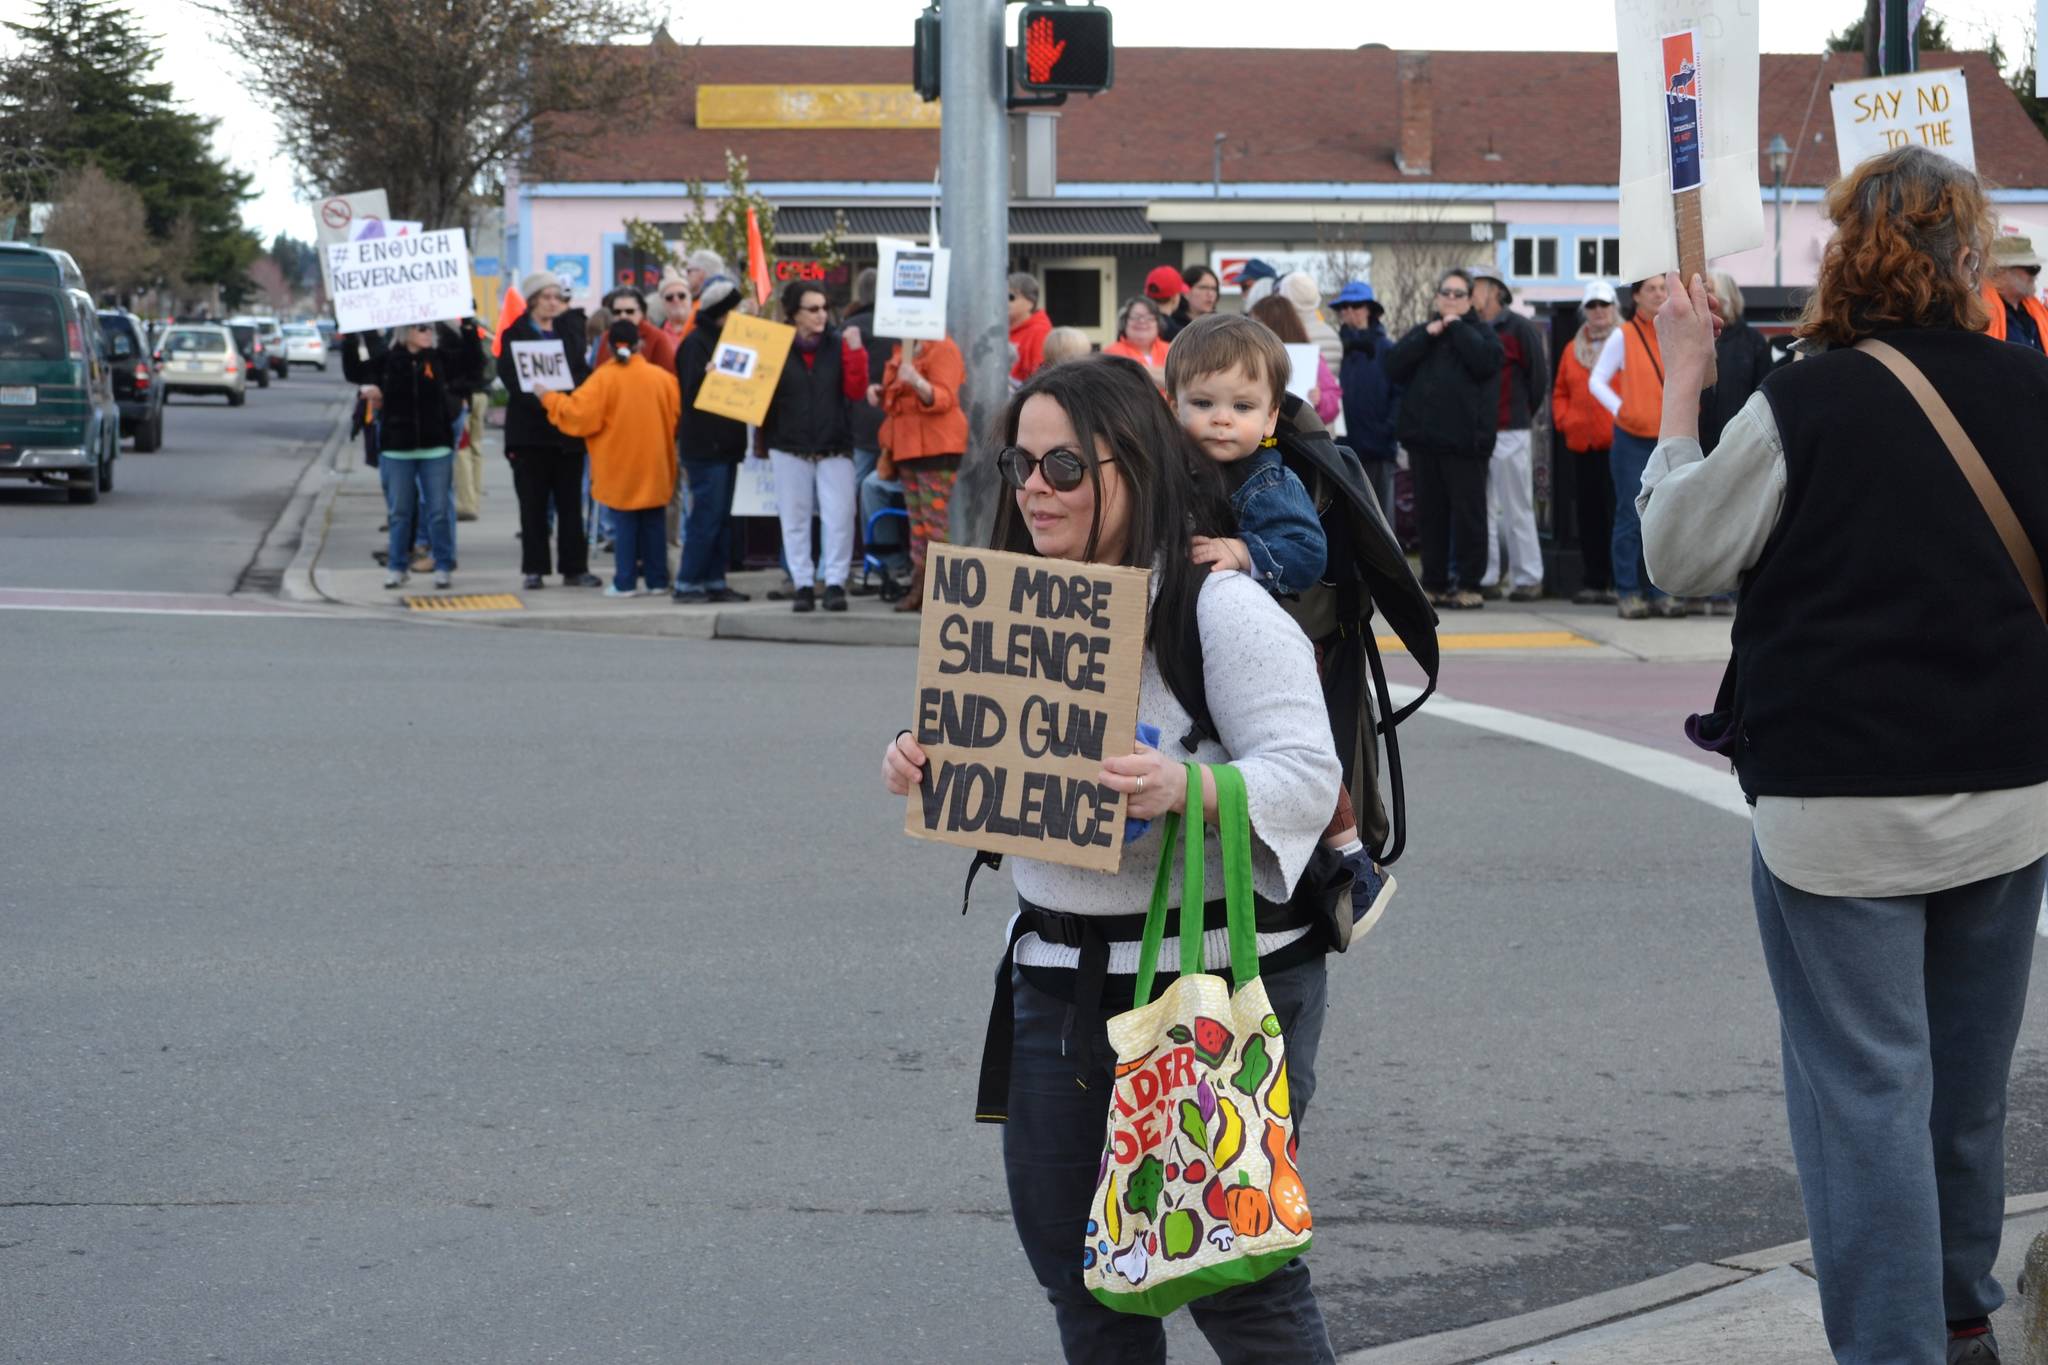 Katie Rodgers of Port Angeles stands with her son Liam, 18 months, on one of the corners of Sequim Avenue and Washington Street in Sequim on March 24 advocating for stricter gun control policies. “I hope it speaks volumes for a small town to show support for an event like this,” she said.